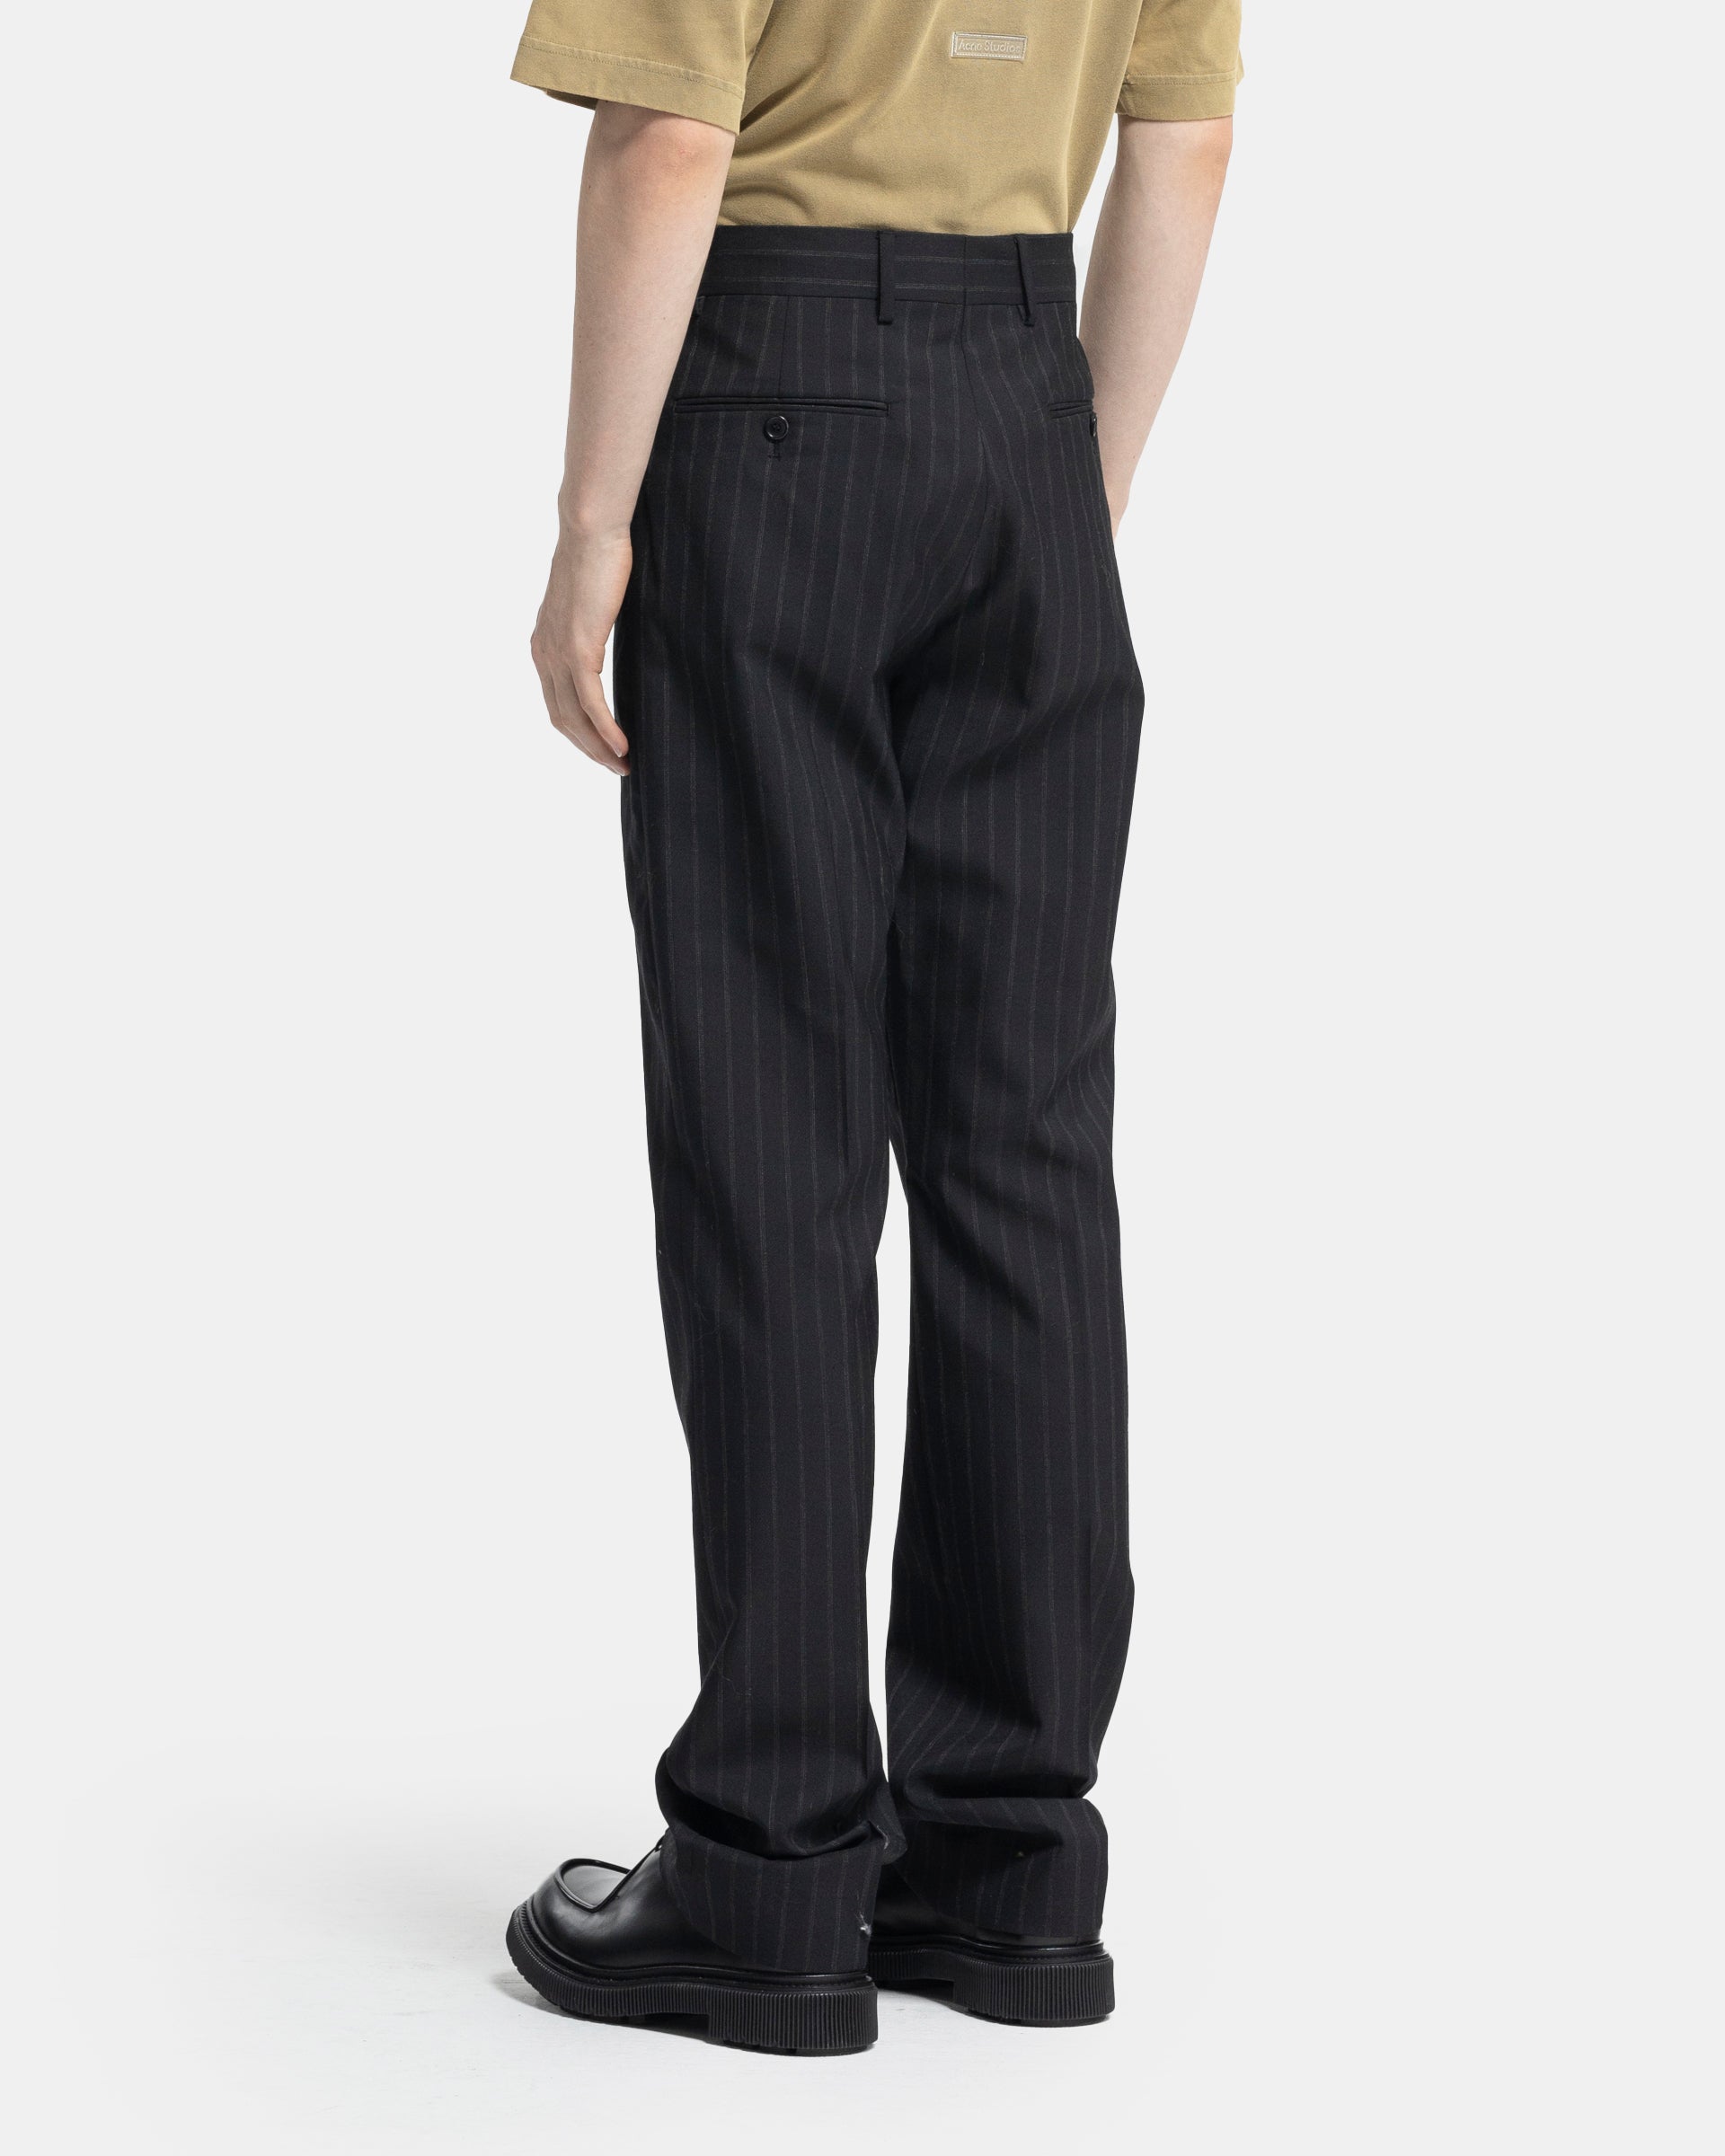 Wool Tailored Trousers in Black & Grey